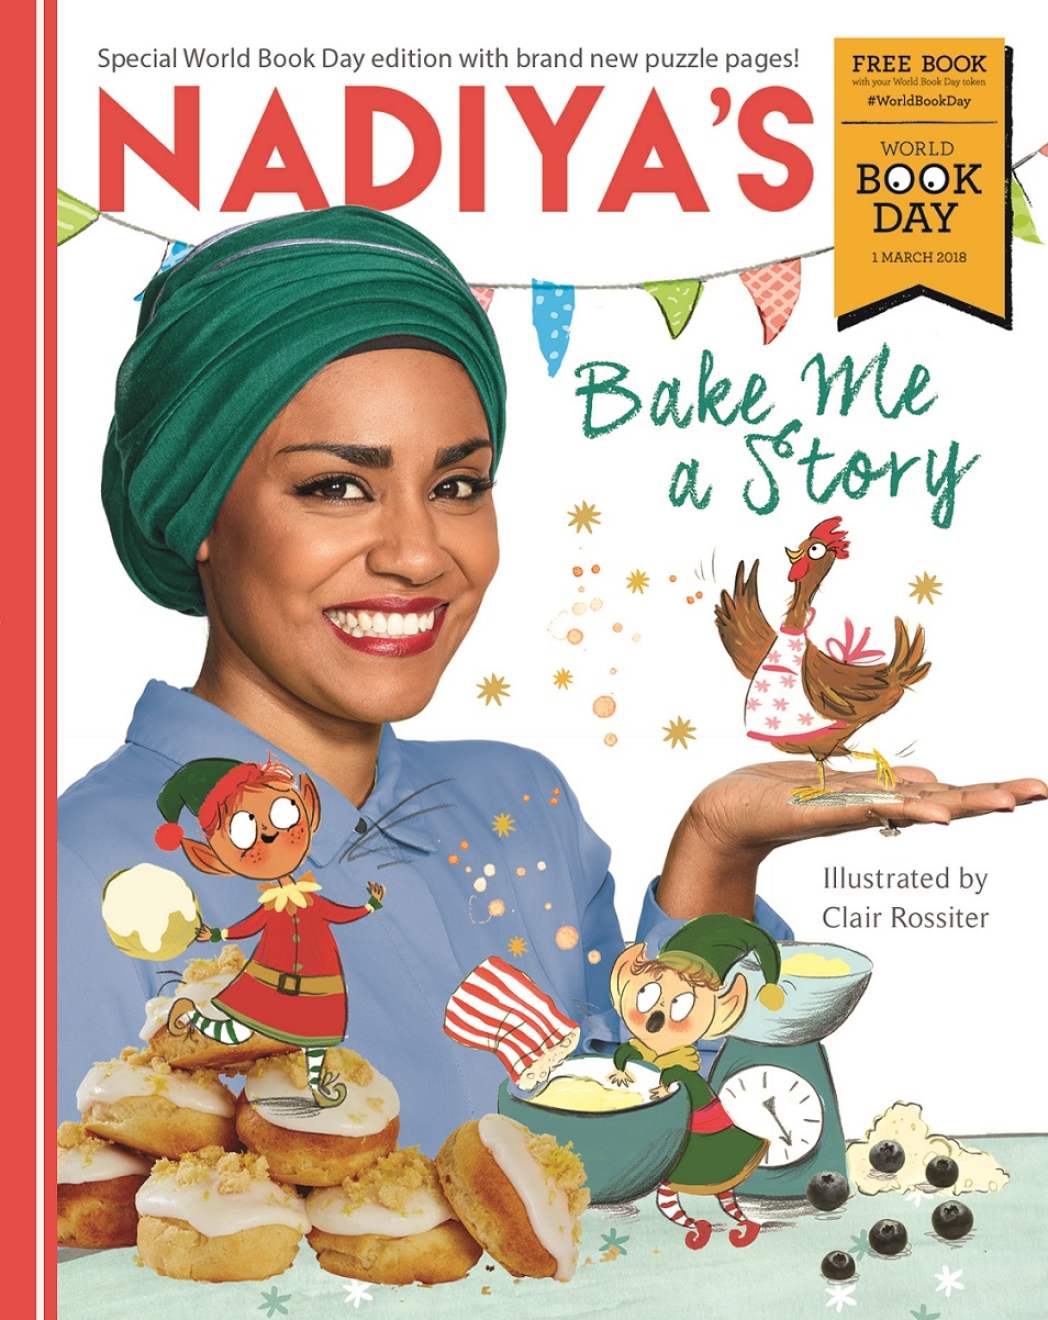 Image for blog - World Book Day 2018: Nadiya Pens a Foodie Story for all the Family